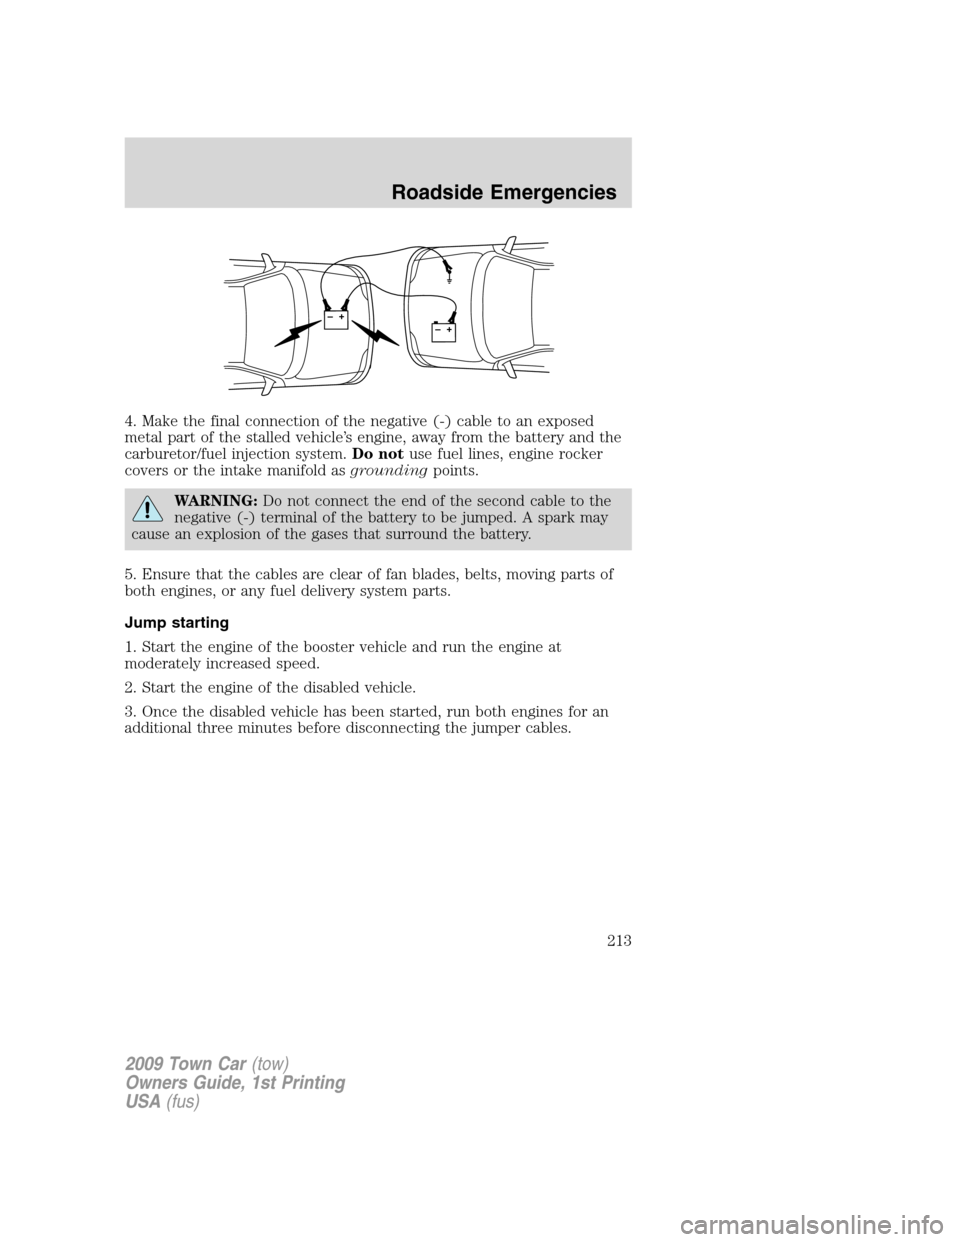 LINCOLN TOWN CAR 2009 Service Manual 4. Make the final connection of the negative (-) cable to an exposed
metal part of the stalled vehicle’s engine, away from the battery and the
carburetor/fuel injection system.Do notuse fuel lines, 